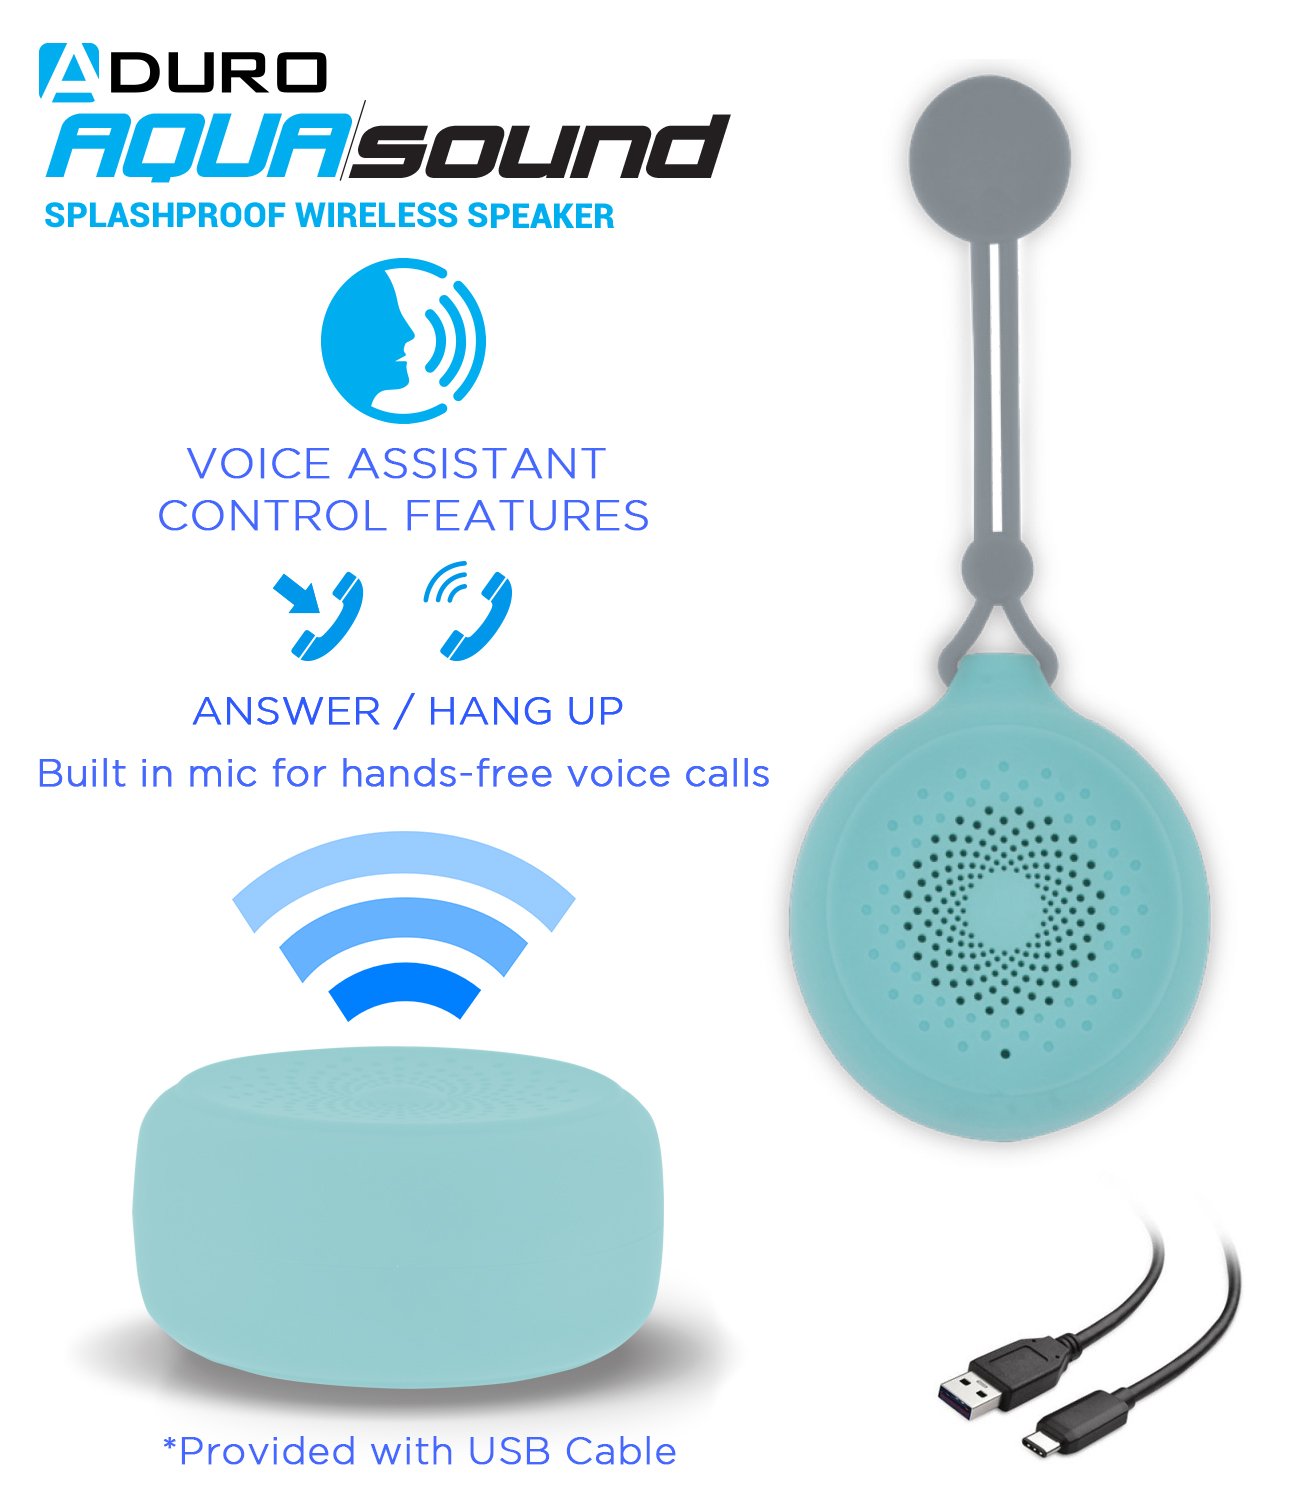 Aduro Shower Speaker Waterproof Speakers, Bluetooth Wireless Speaker with Hanging Susction Cup and Built-in Mic Waterproof Portable Bluetooth Speaker with 6 Hrs of Playtime, Music Controls - image 4 of 7